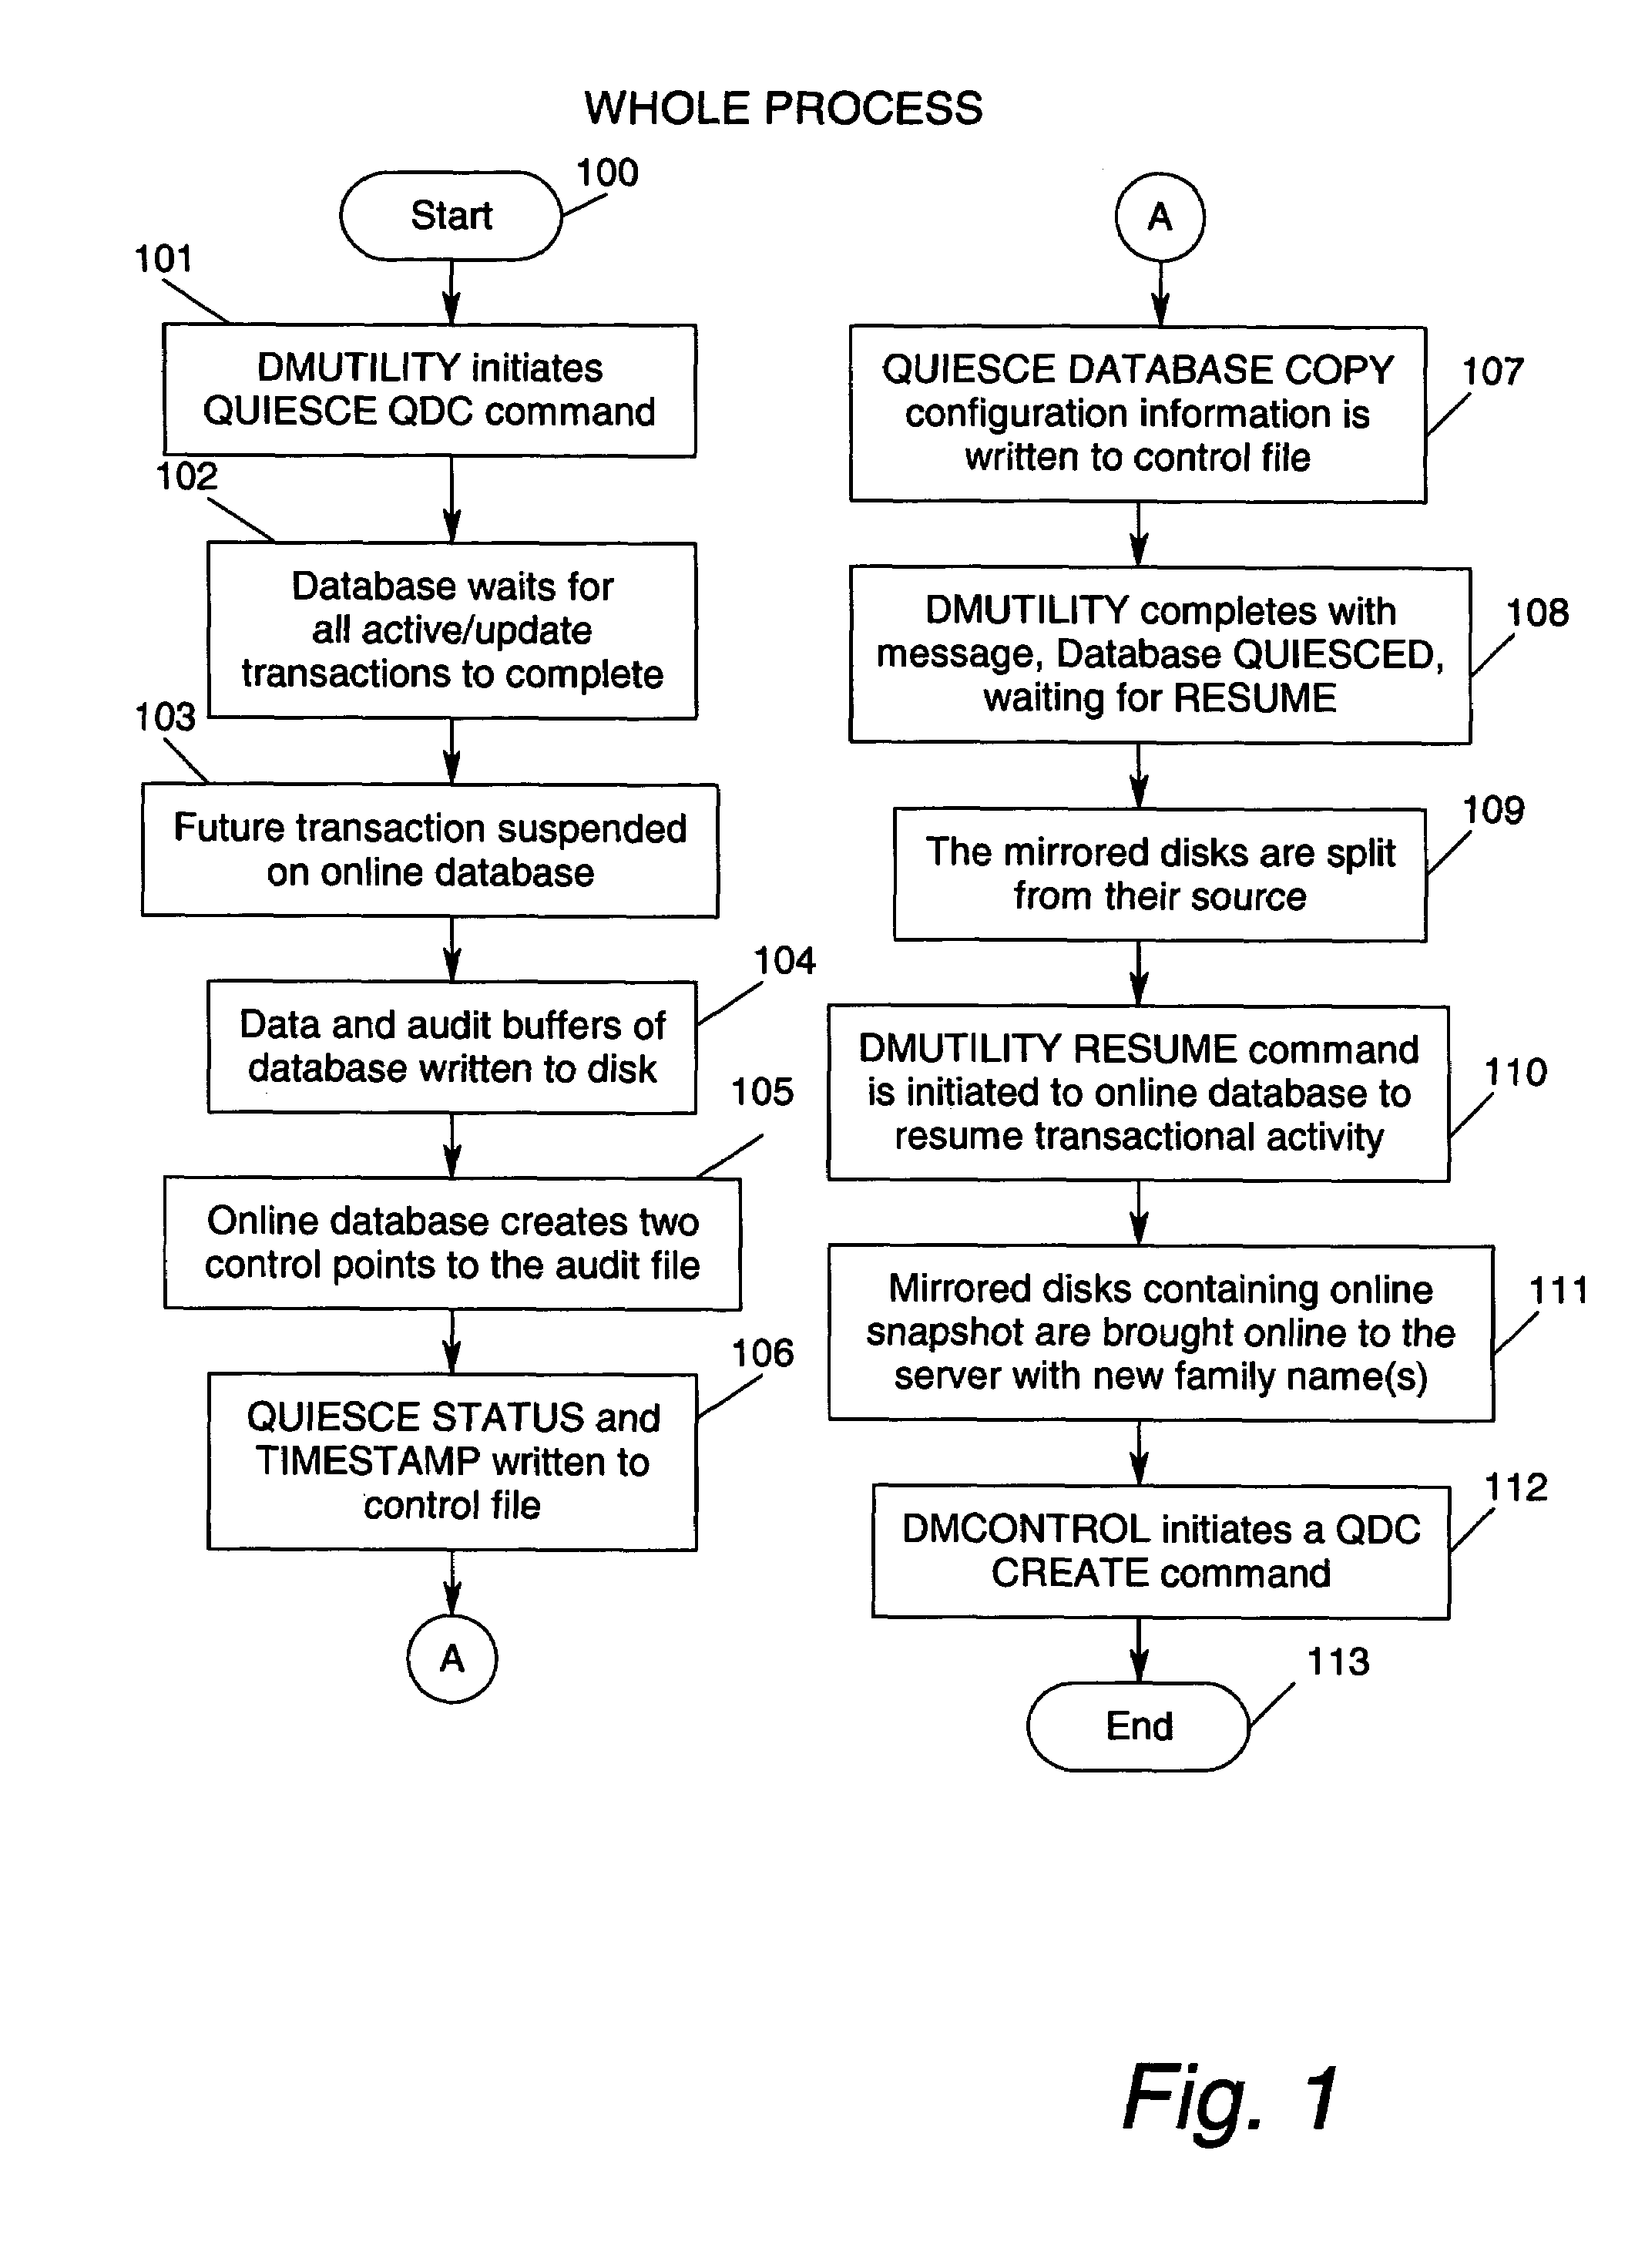 System and method for creating multiple QUIESCE database copies at a single server